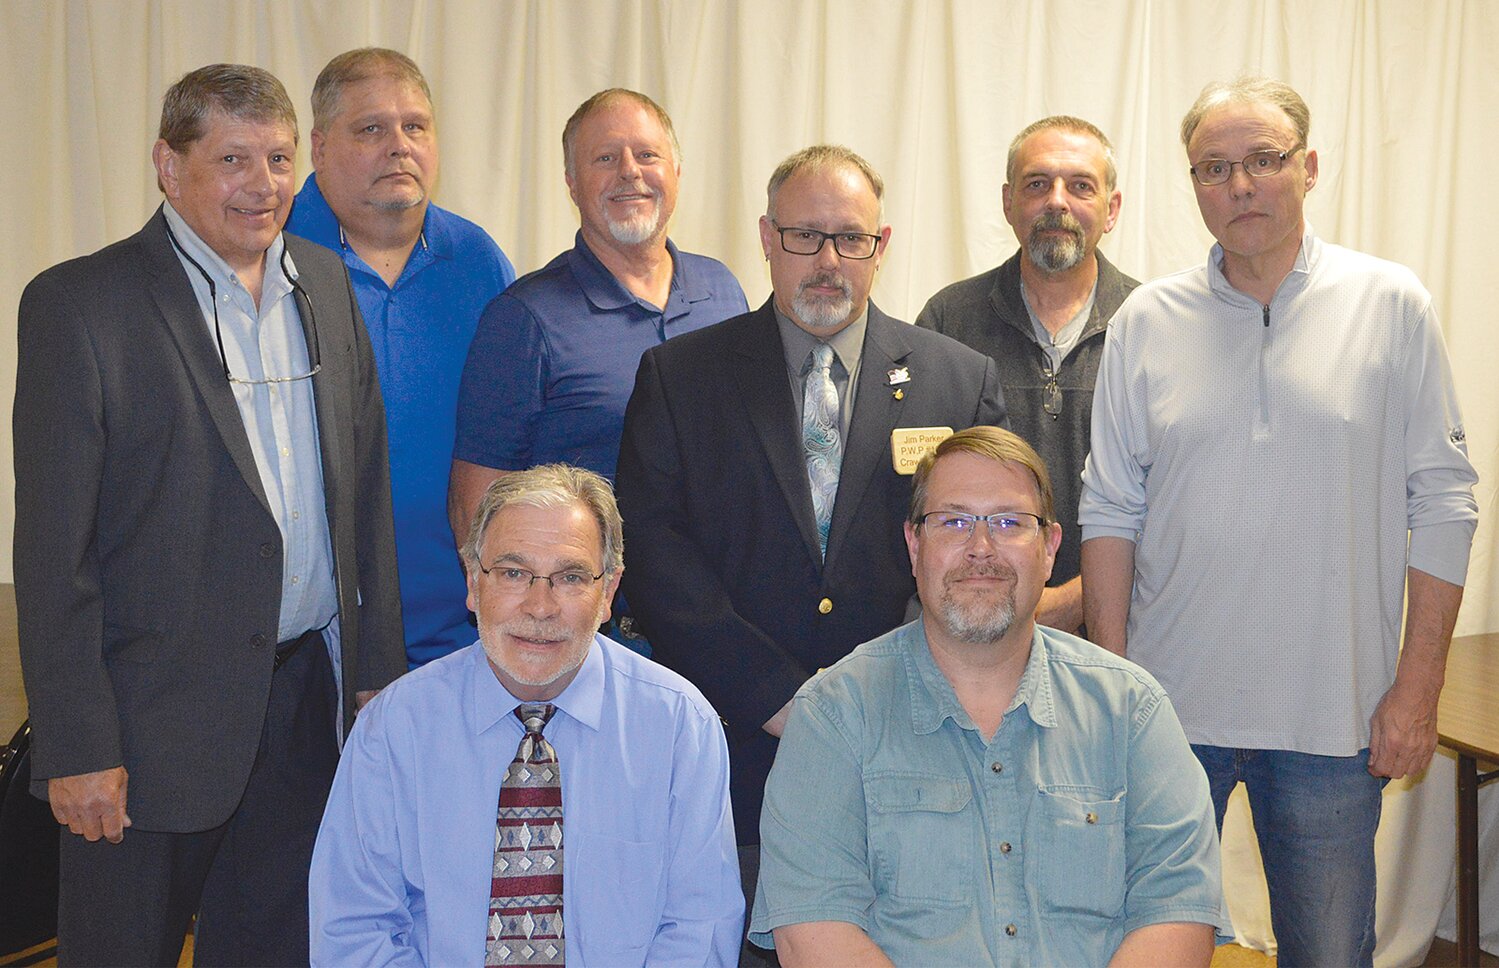 Crawfordsville Eagles Aerie & Auxiliary recently installed new officers for 2024-25. Aerie officers are, from left, front row, Jr Past Worthy President Phil Thompson and Worthy President Brian Foy; middle row, Secretary Darry Grimes, Worthy Chaplain Jim Parker, Trustee Dave Lawhorn; and back row, Trustees Terry Craft, Brett Cating, Jim Shahan. Not pictured are Worthy Vice President Alan Homsher, Worthy Conductor Billy Williams and Treasurer Doug Mather.